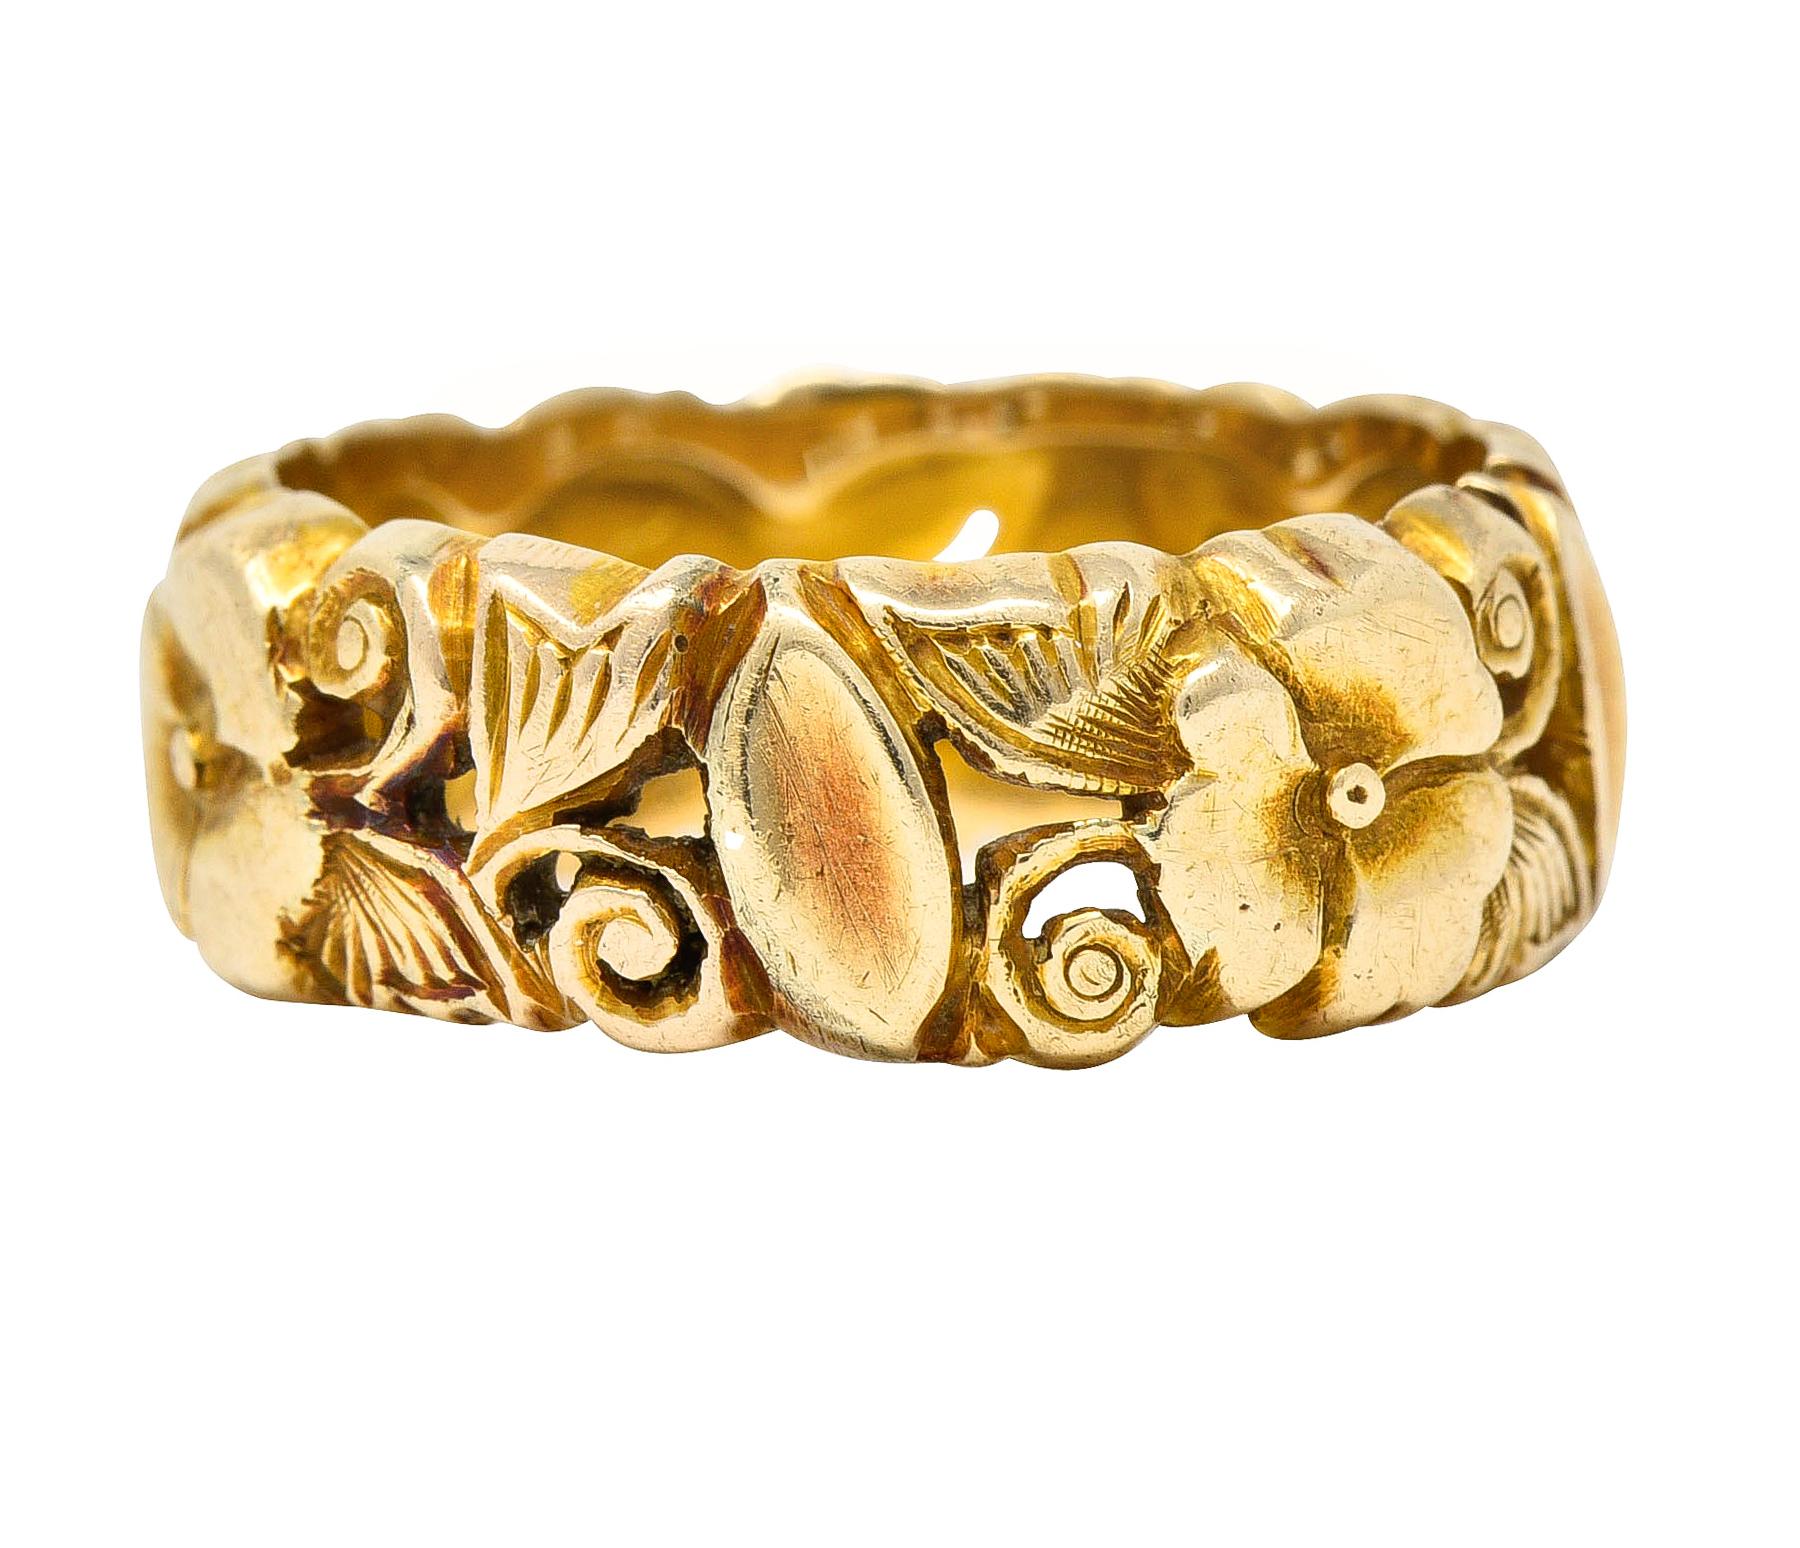 Designed as a highly rendered garland of pansy flowers fully around. Pierced with swirling vines and engraved foliage. Tested as 14 karat gold. Circa: 1905. Ring size: 7 1/4 and not sizable. Measures North to South 7.5 and sits 2.0 mm high. Total